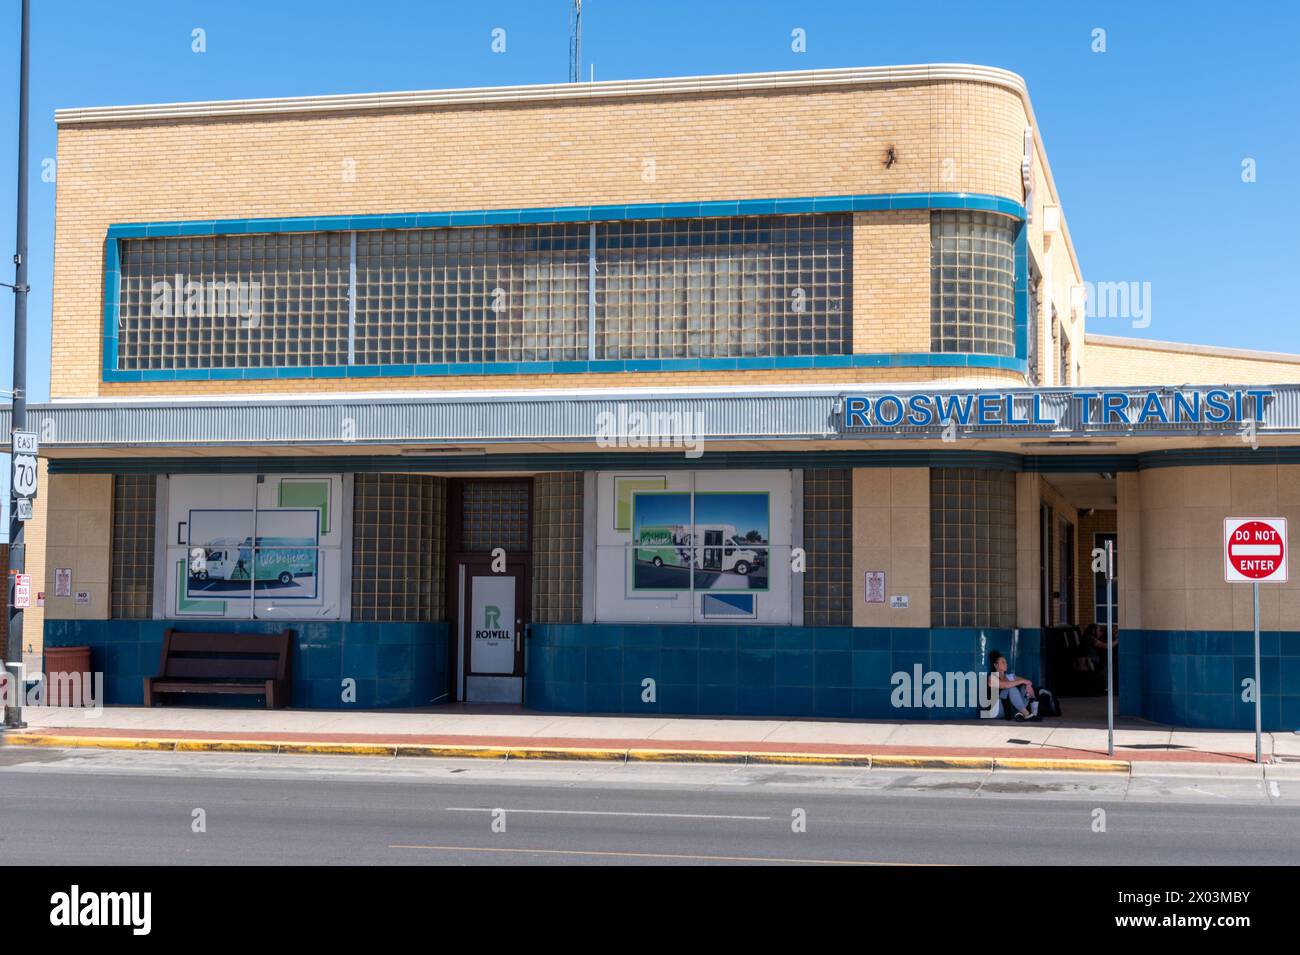 Roswell Transit station, once a GreyHound Bus Depot, built in art deco streamline moderne style, on Main Street, Roswell, New Mexico, USA. Stock Photo